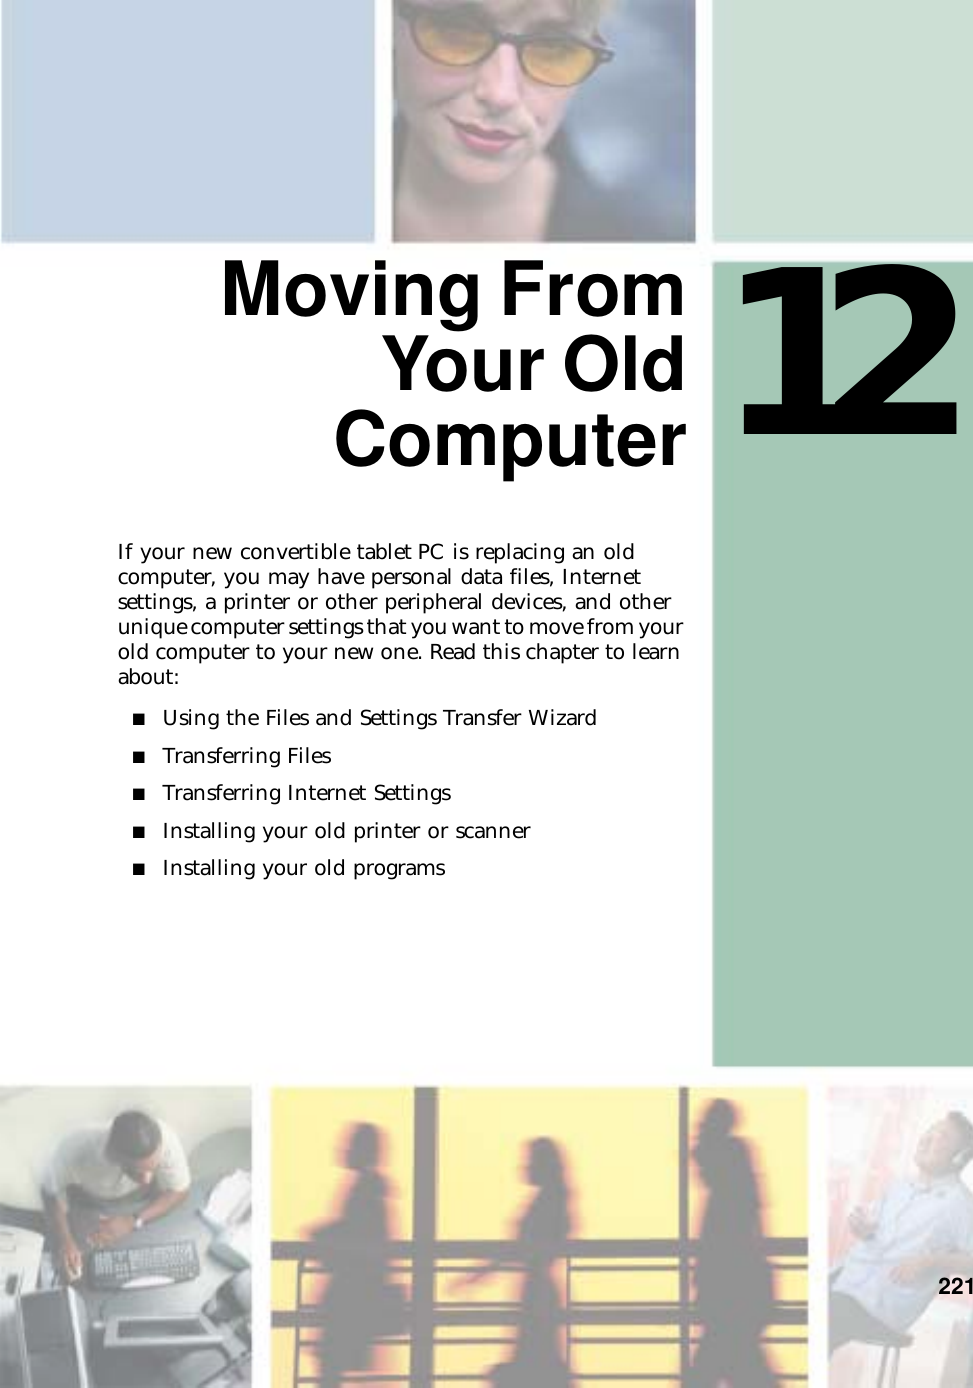 12221Moving FromYour OldComputerIf your new convertible tablet PC is replacing an old computer, you may have personal data files, Internet settings, a printer or other peripheral devices, and other unique computer settings that you want to move from your old computer to your new one. Read this chapter to learn about:■Using the Files and Settings Transfer Wizard■Transferring Files■Transferring Internet Settings■Installing your old printer or scanner■Installing your old programs